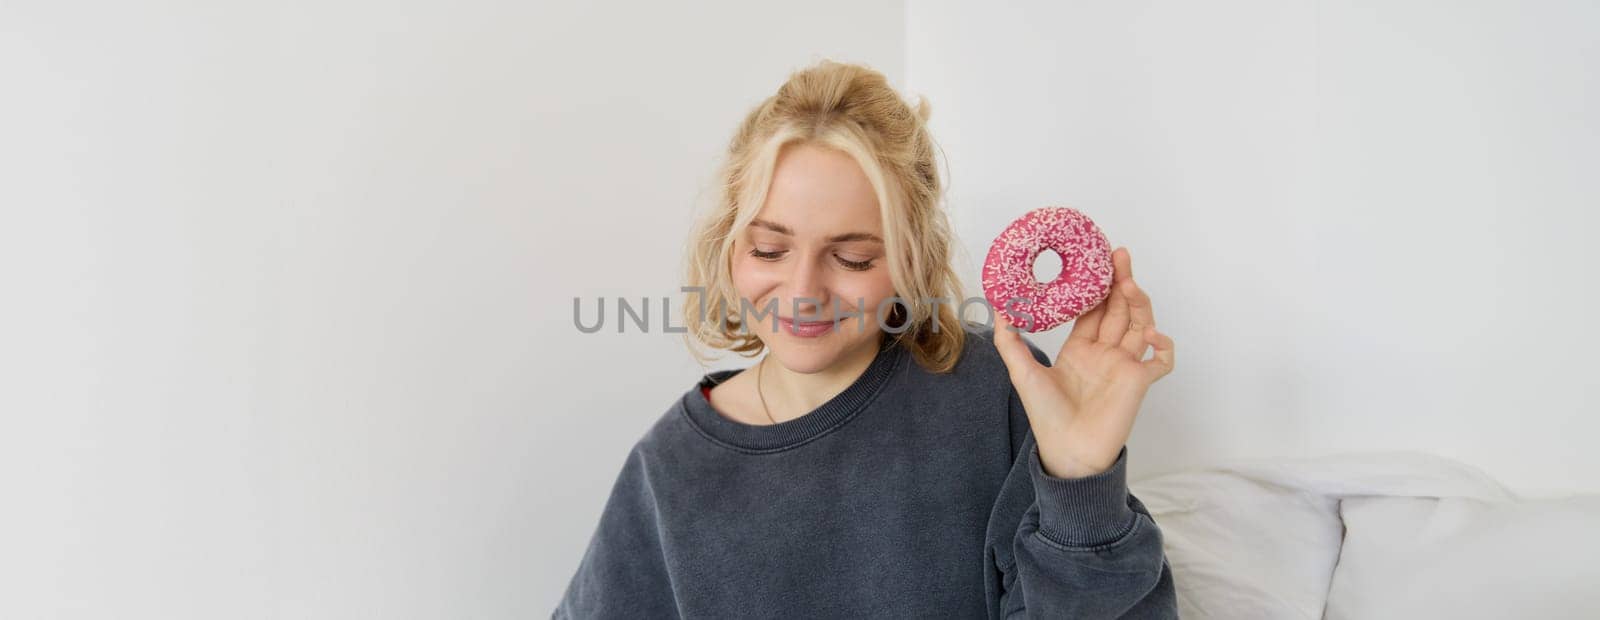 Portrait of cute blond girl holding pink doughnut with sprinkles on top, showing her favourite food.